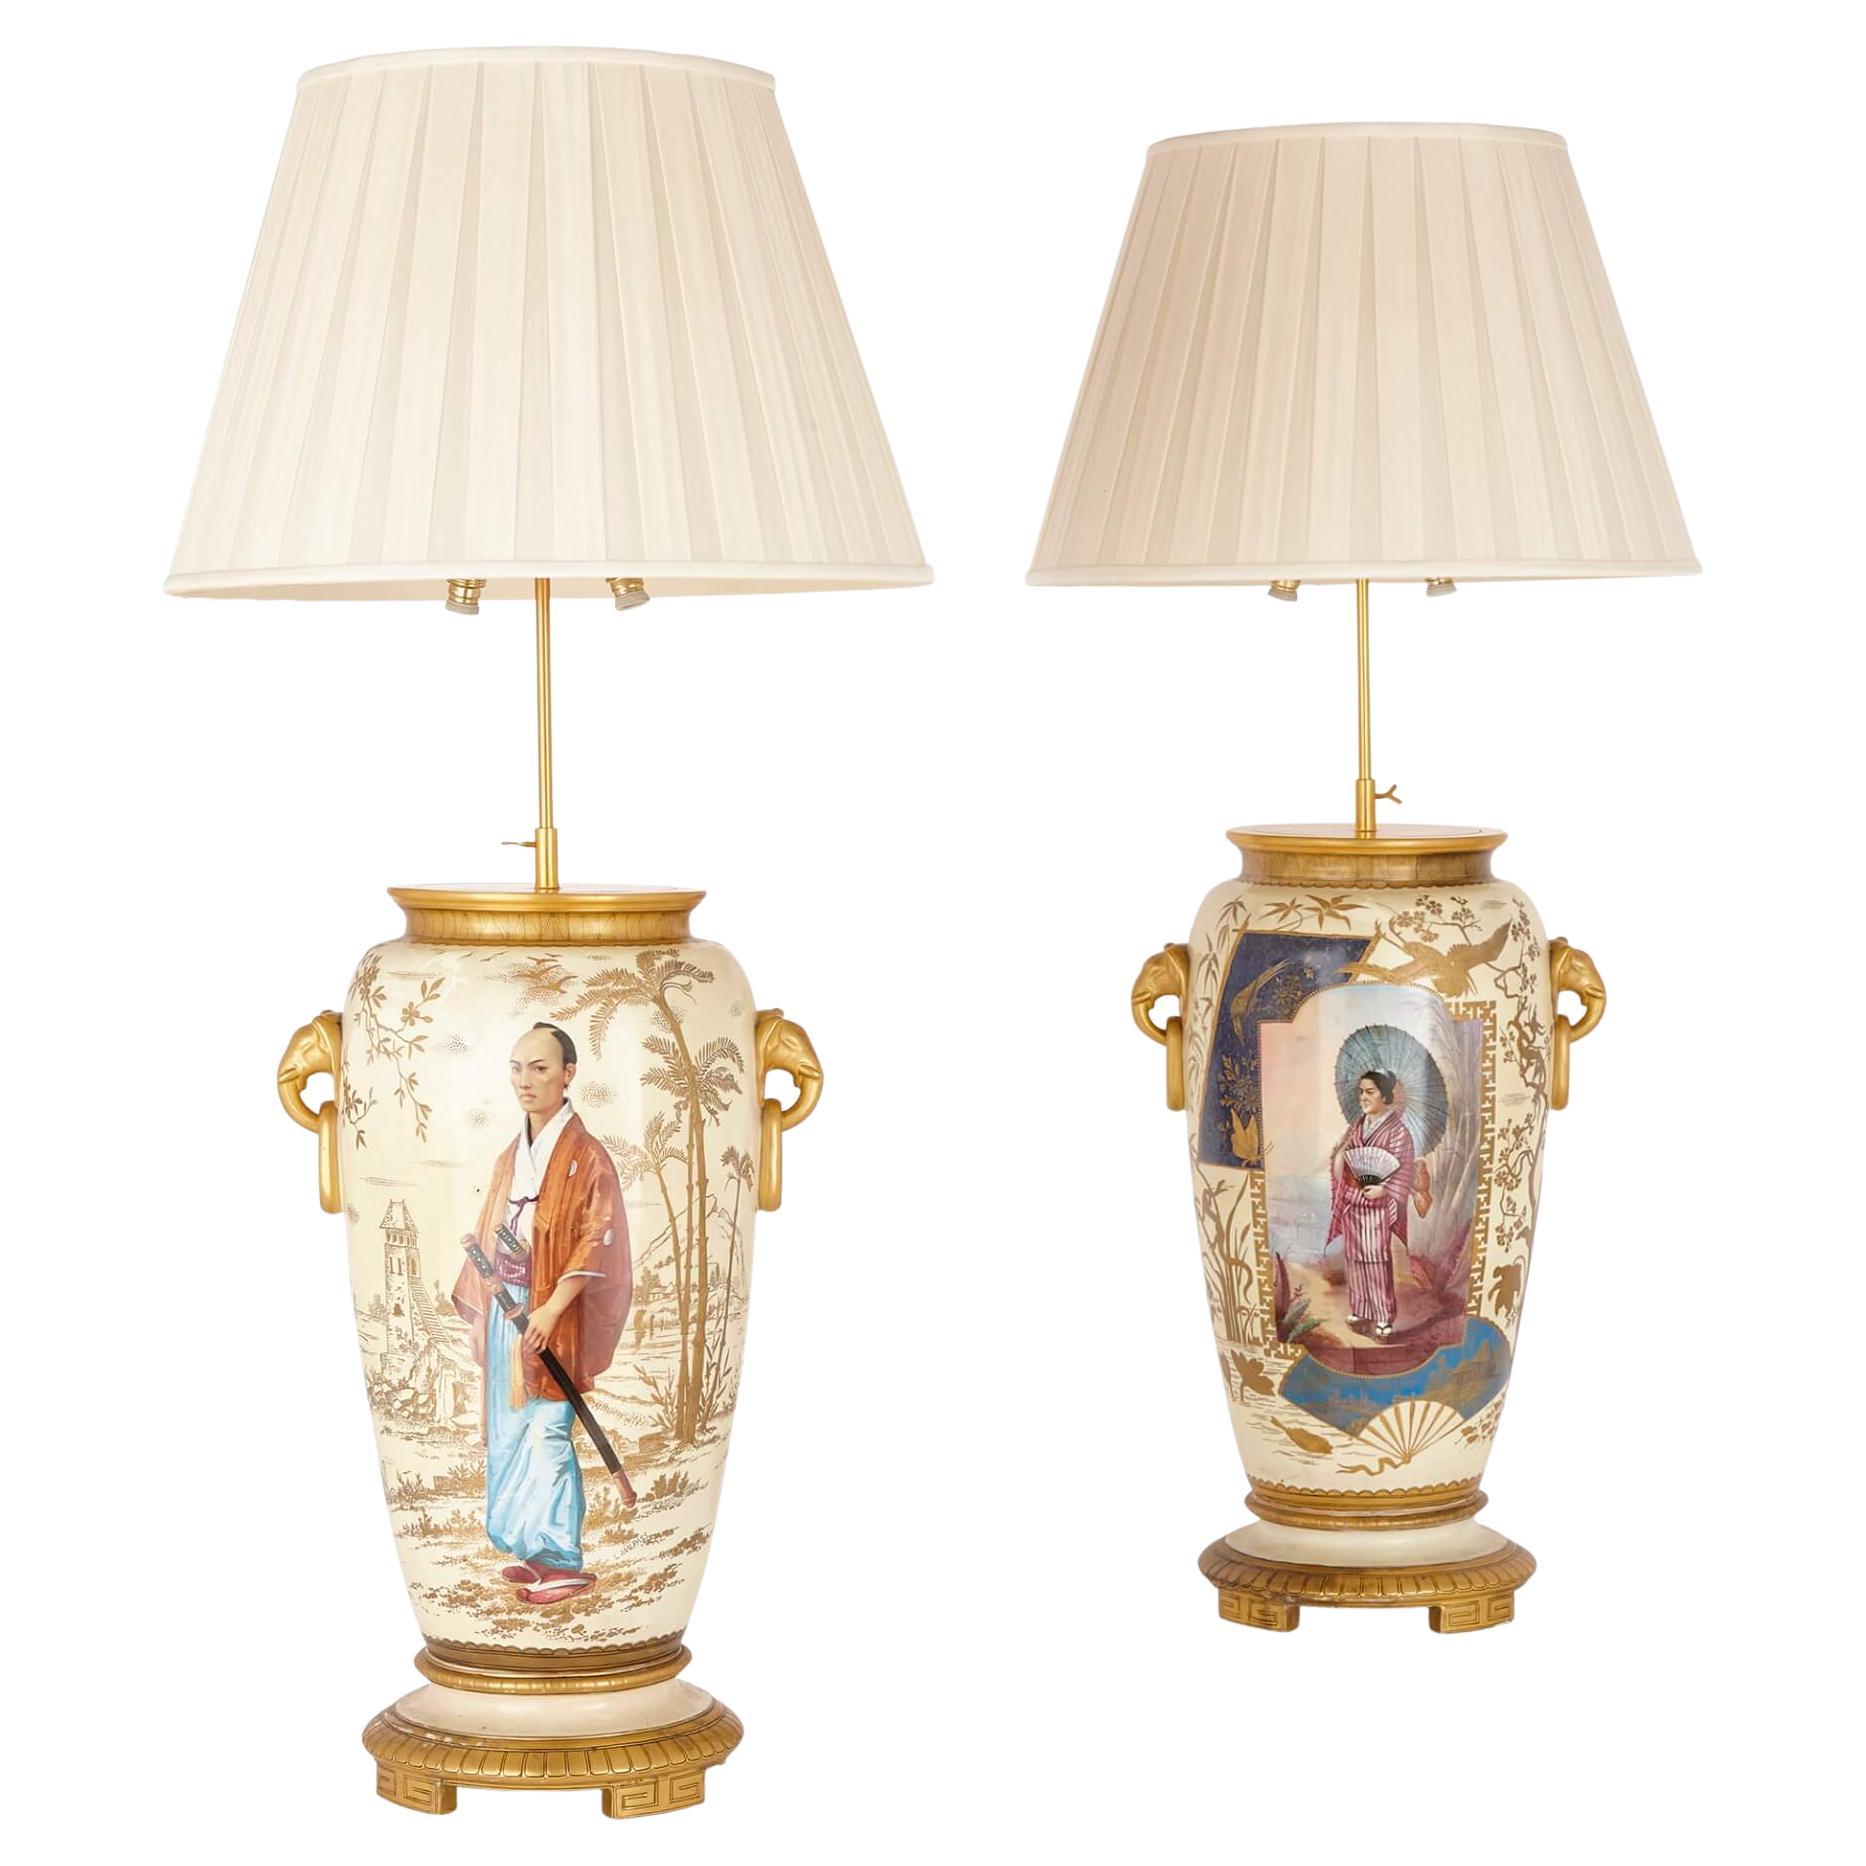 Pair of French Antique Japonisme Glazed Ceramic and Ormolu Mounted Lamps For Sale